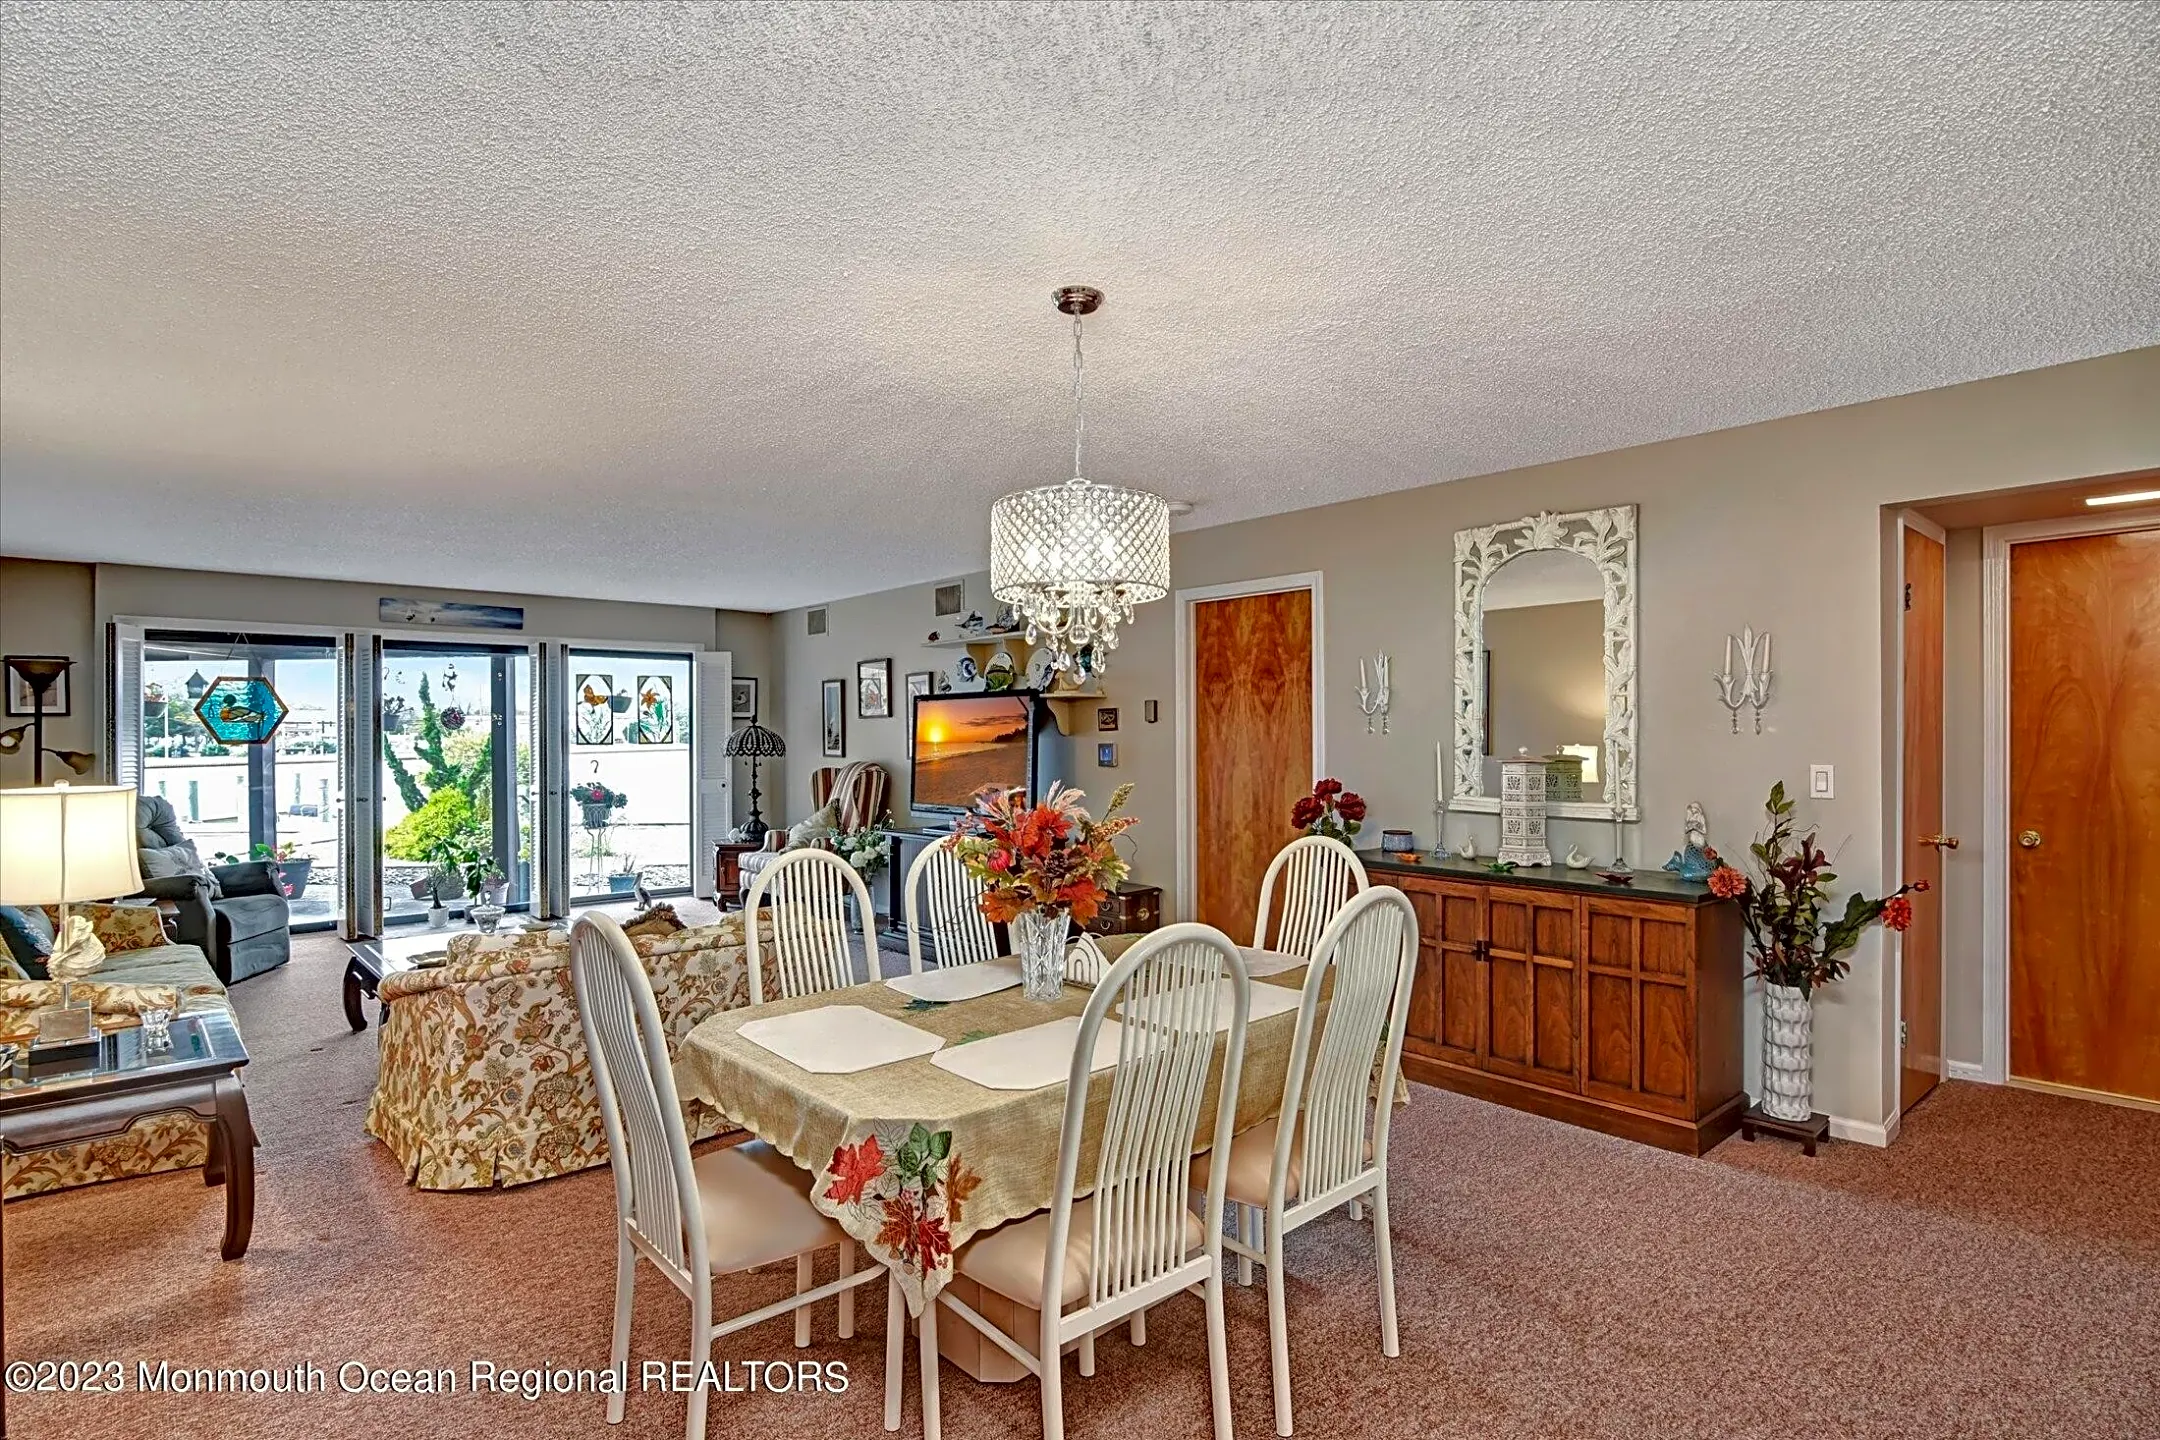 Dining Room - 77 E Water St #5 - Toms River, NJ